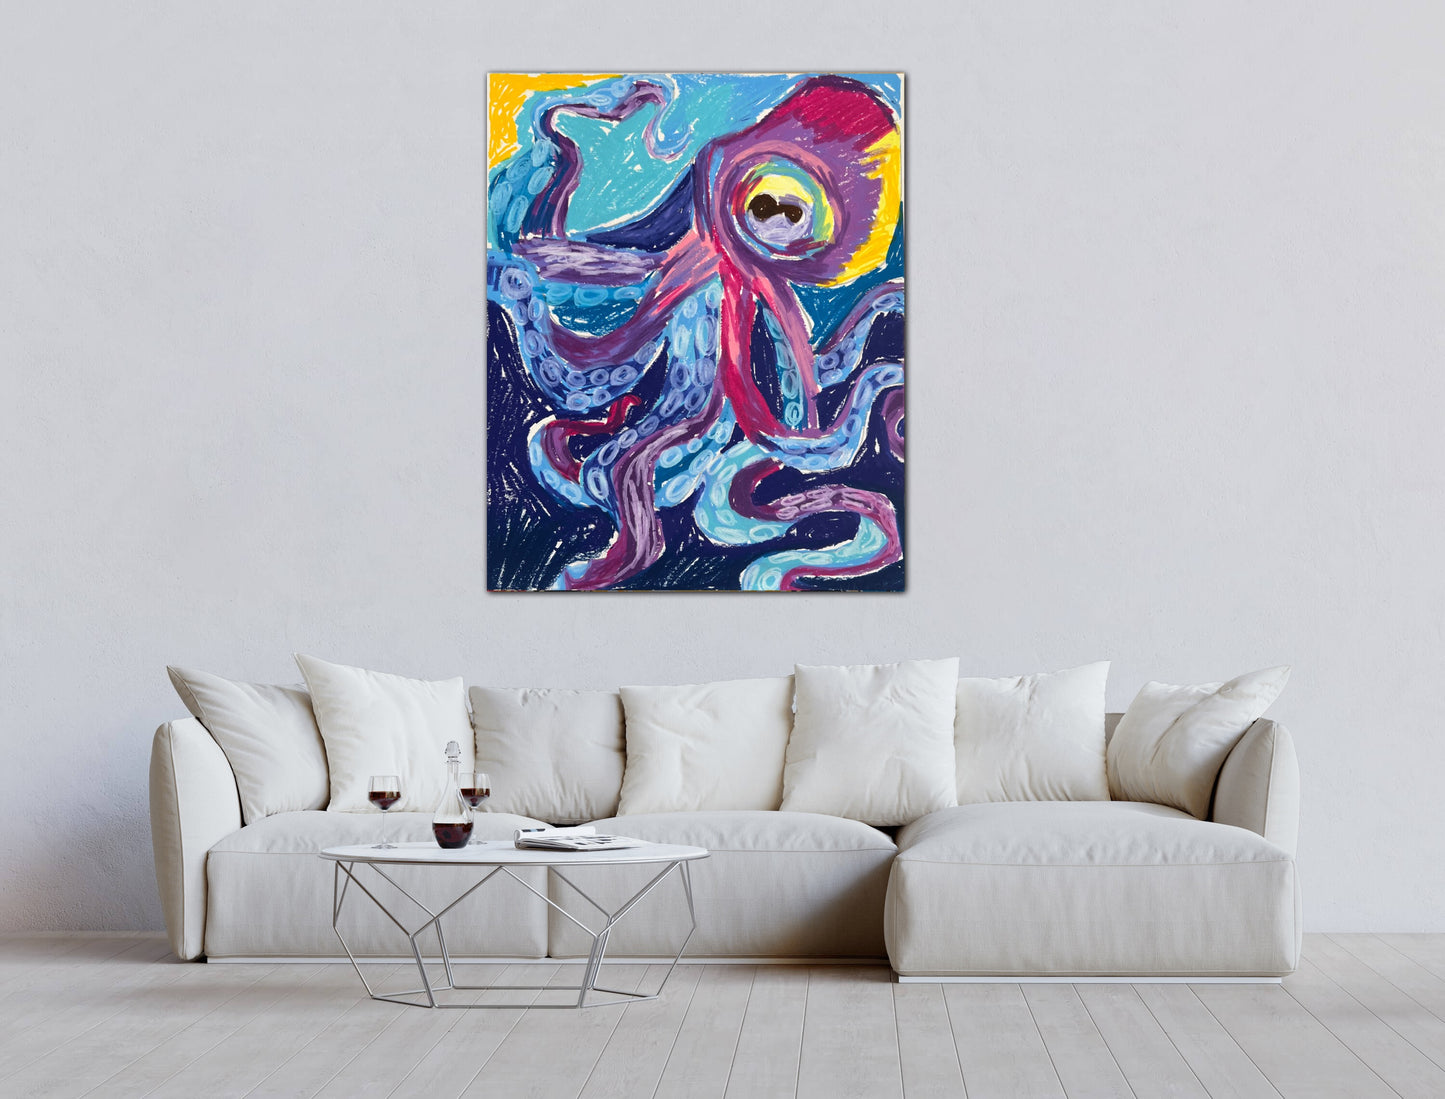 The Purple Octopus - Print, Poster, Stretched Canvas Print